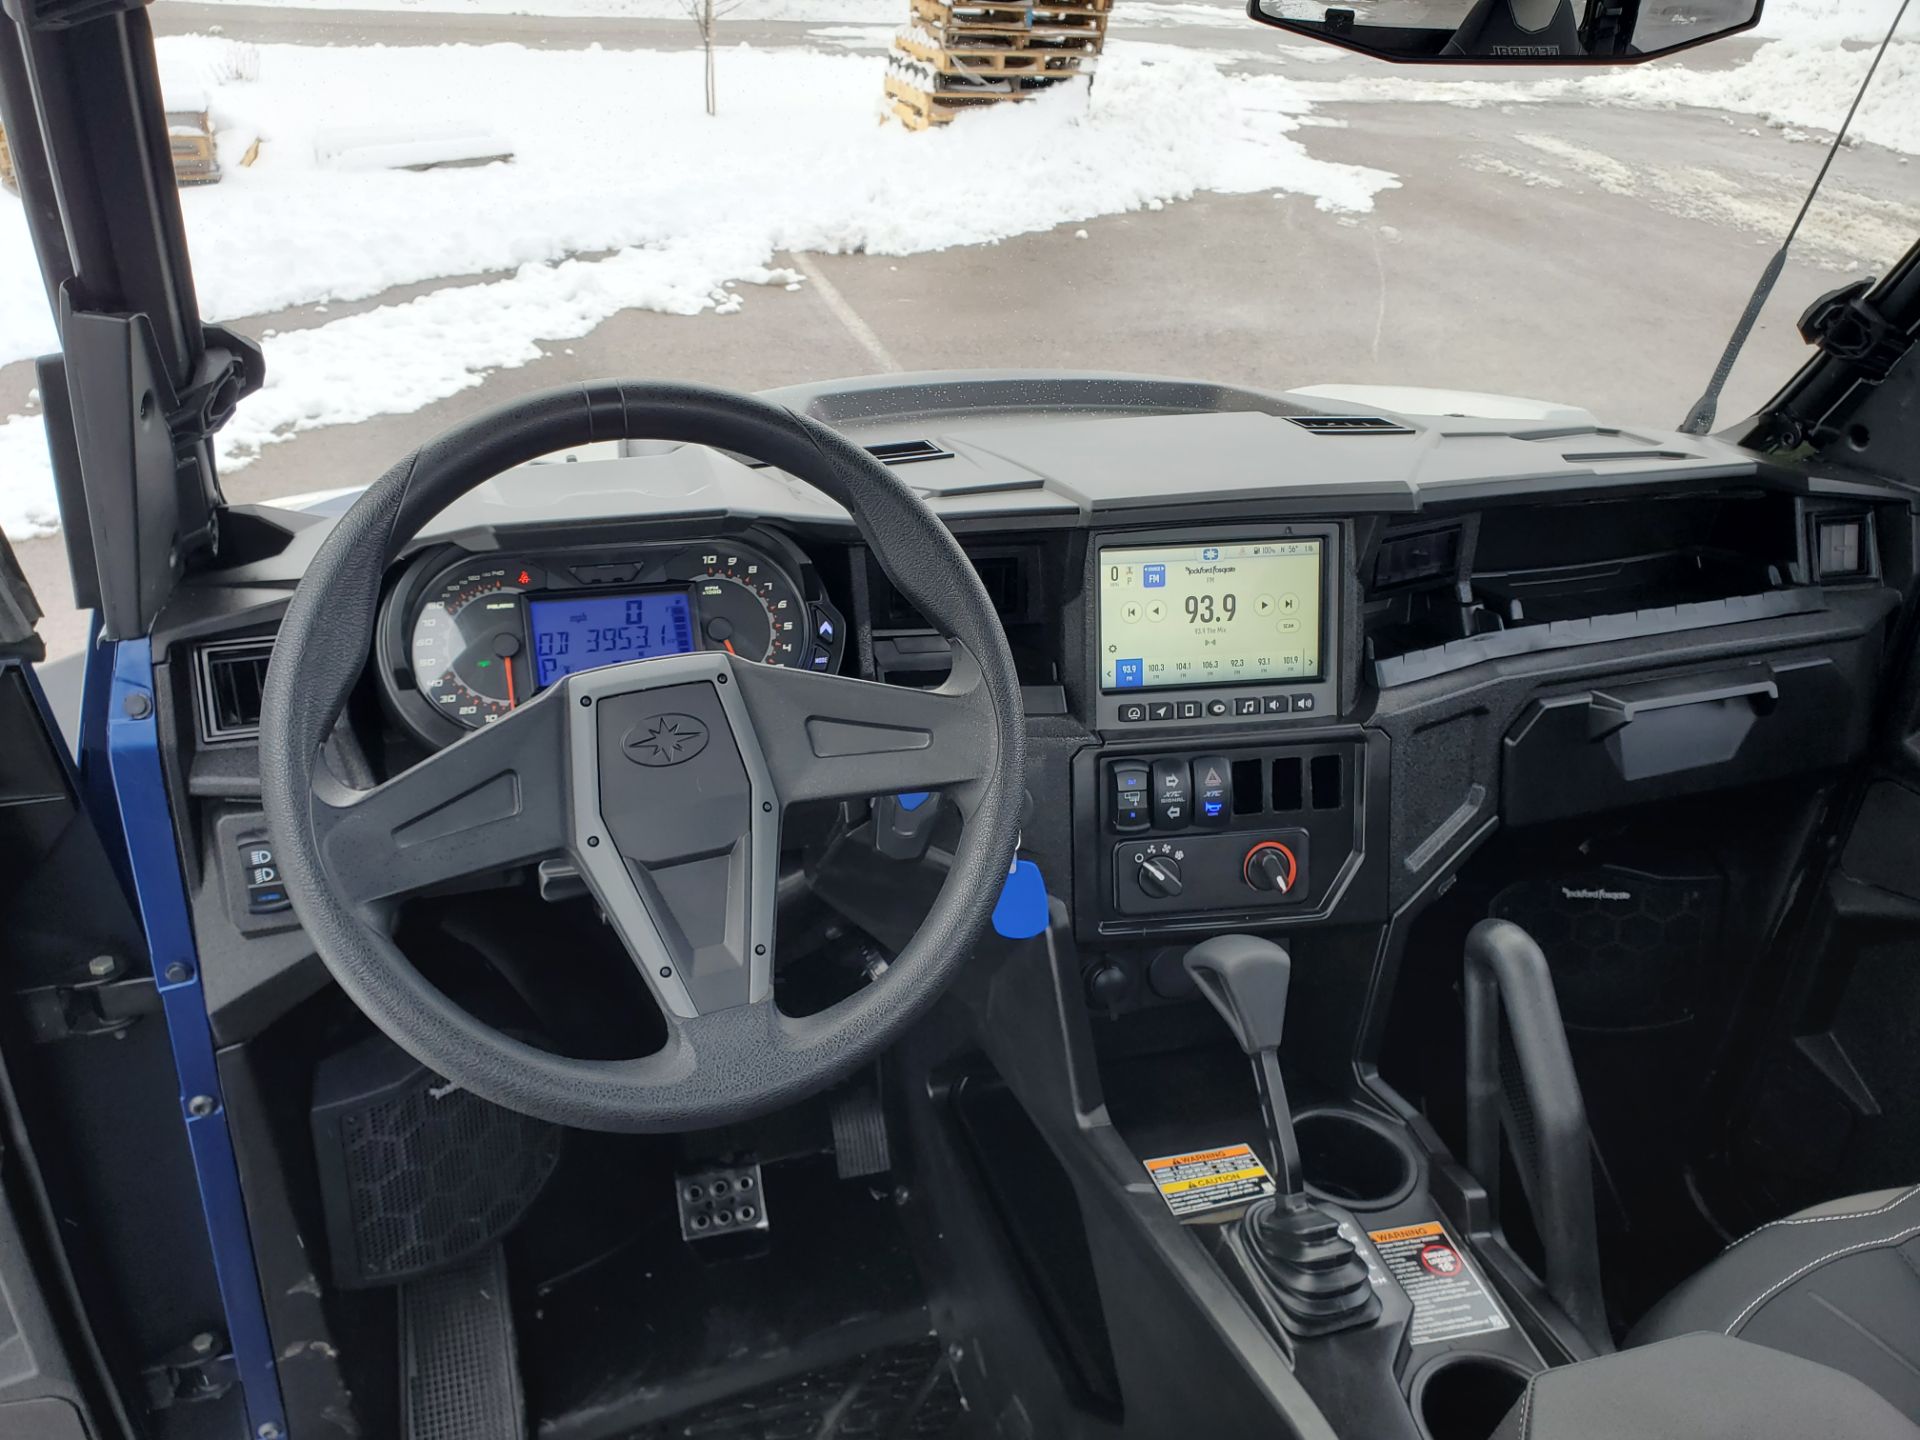 2020 Polaris General XP 1000 Deluxe Ride Command Package in Rapid City, South Dakota - Photo 10